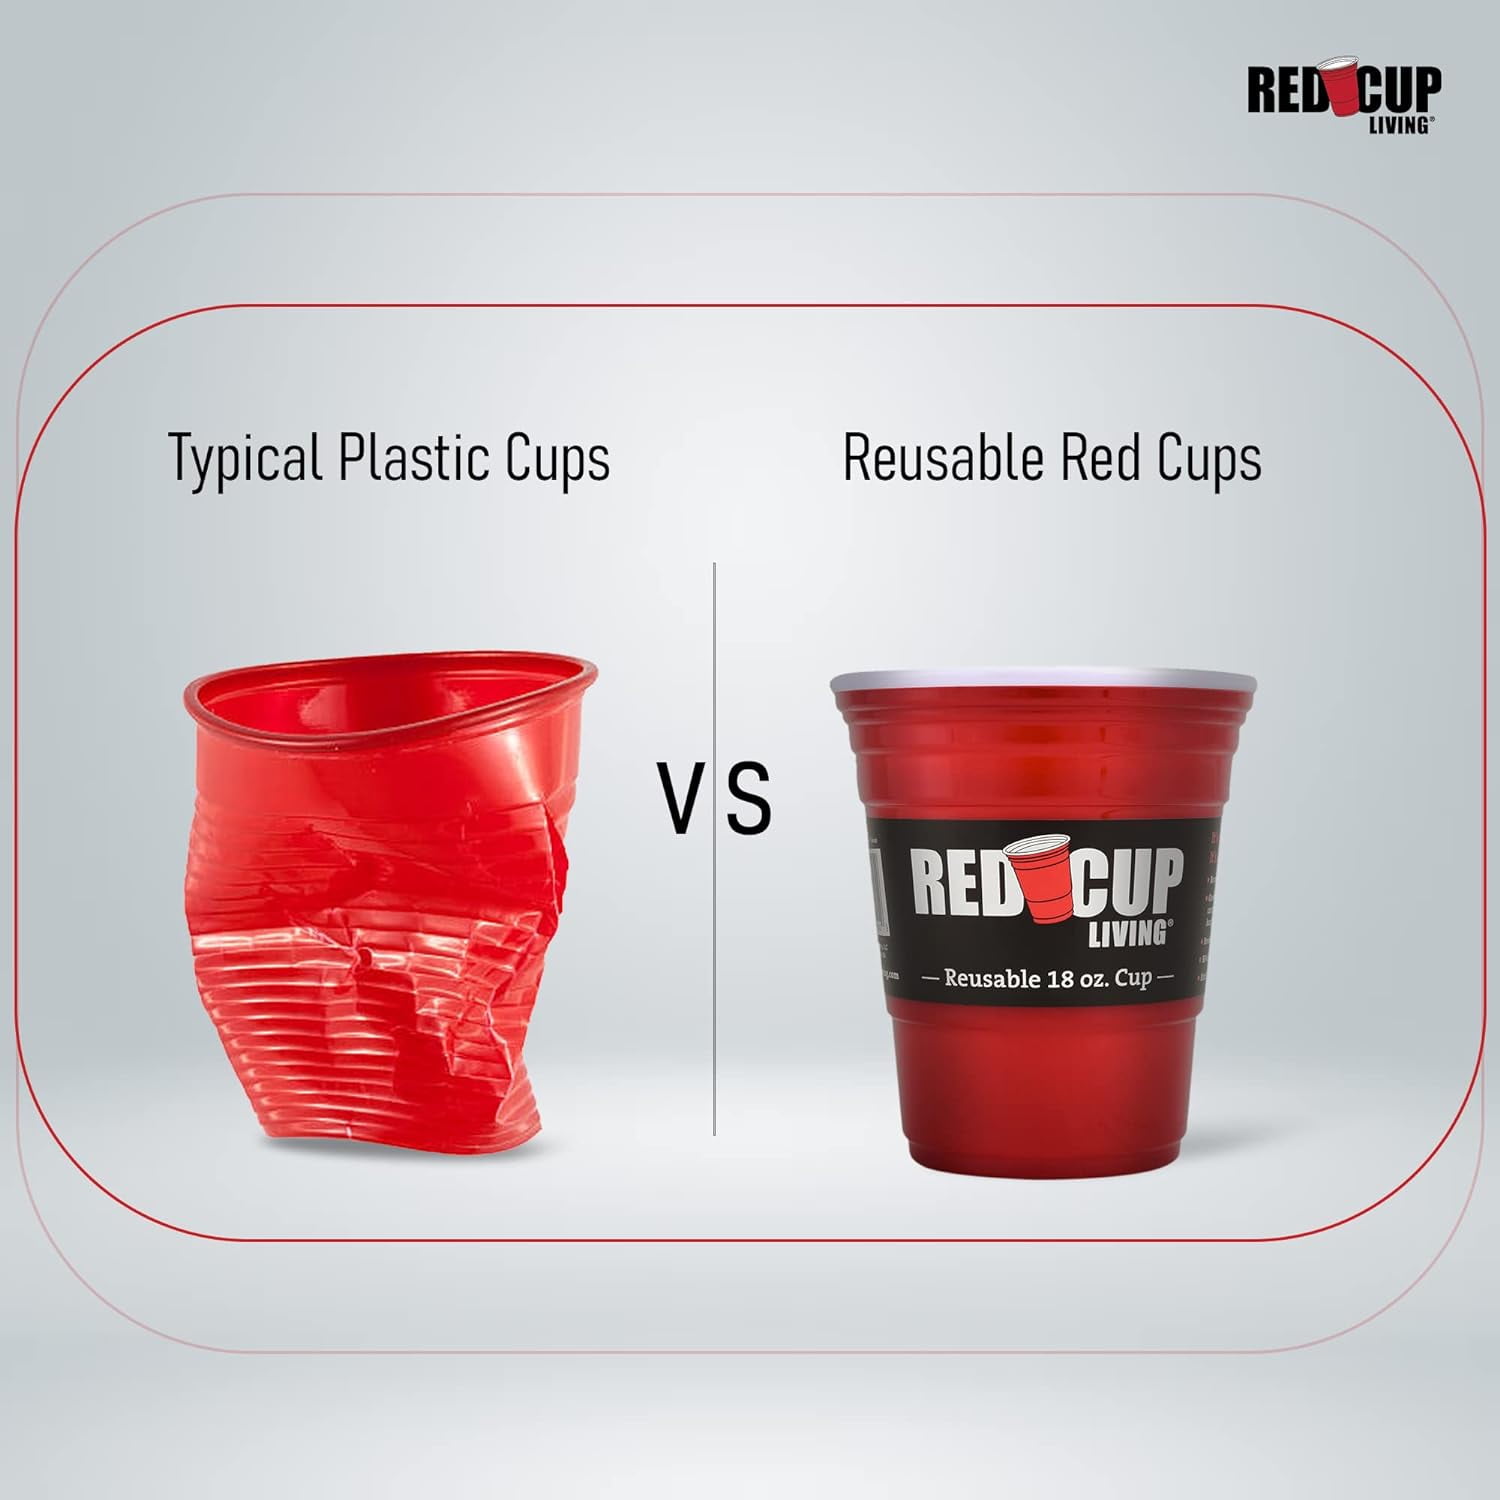 Red Cup Living Reusable Red Plastic Cups, 18 oz Cup - Set of 4, 1 - Kroger